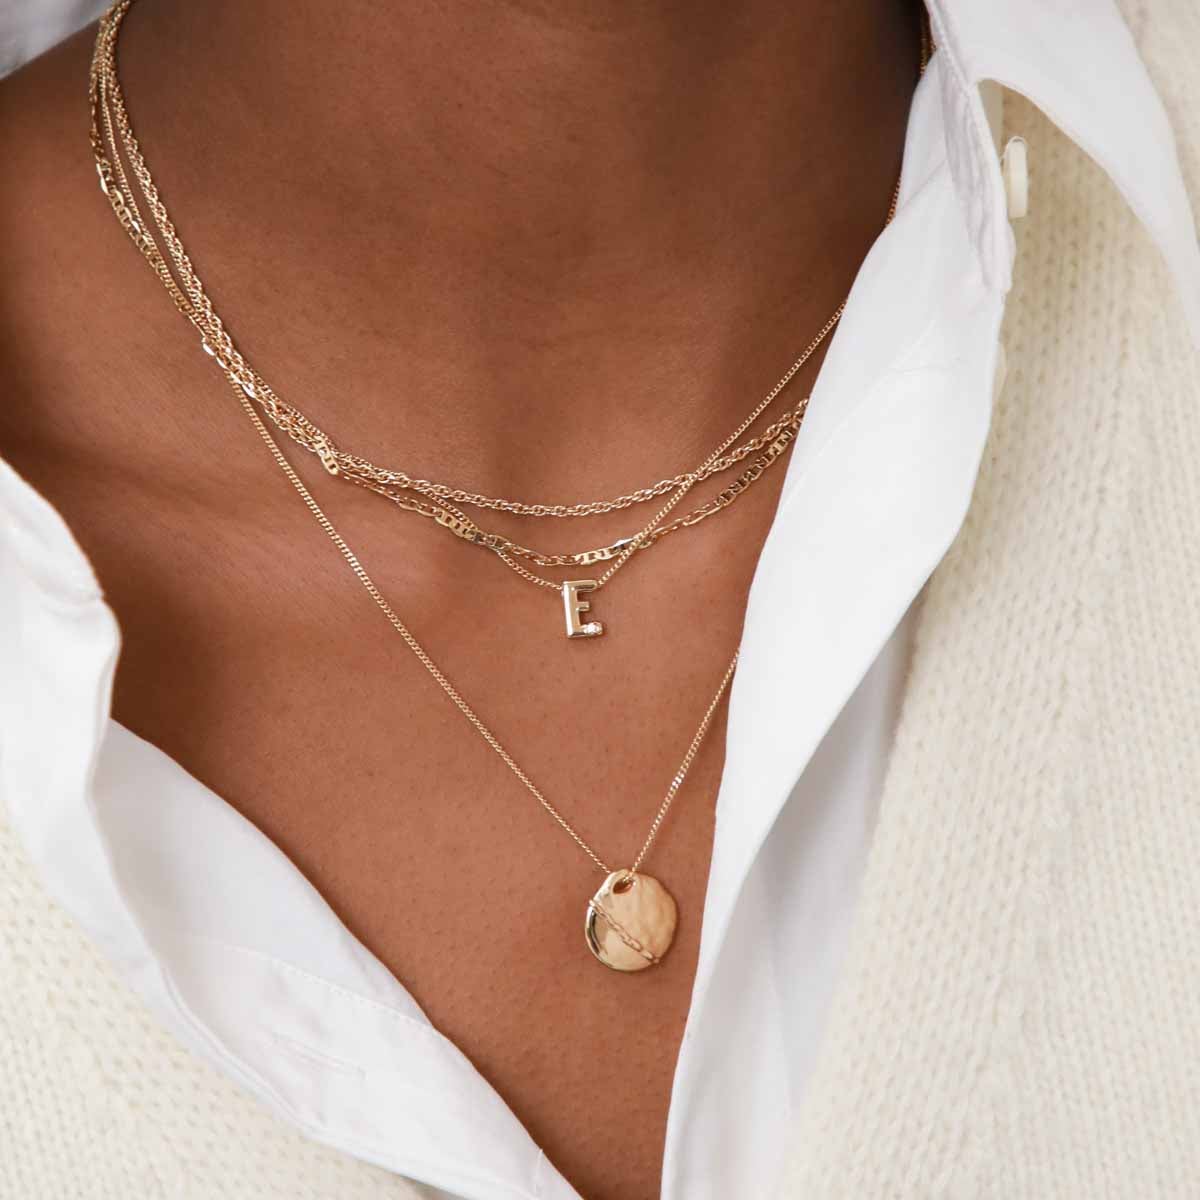 E Initial Pendant Necklace in Gold worn layered with duo chain necklace and molten coin pendant necklace